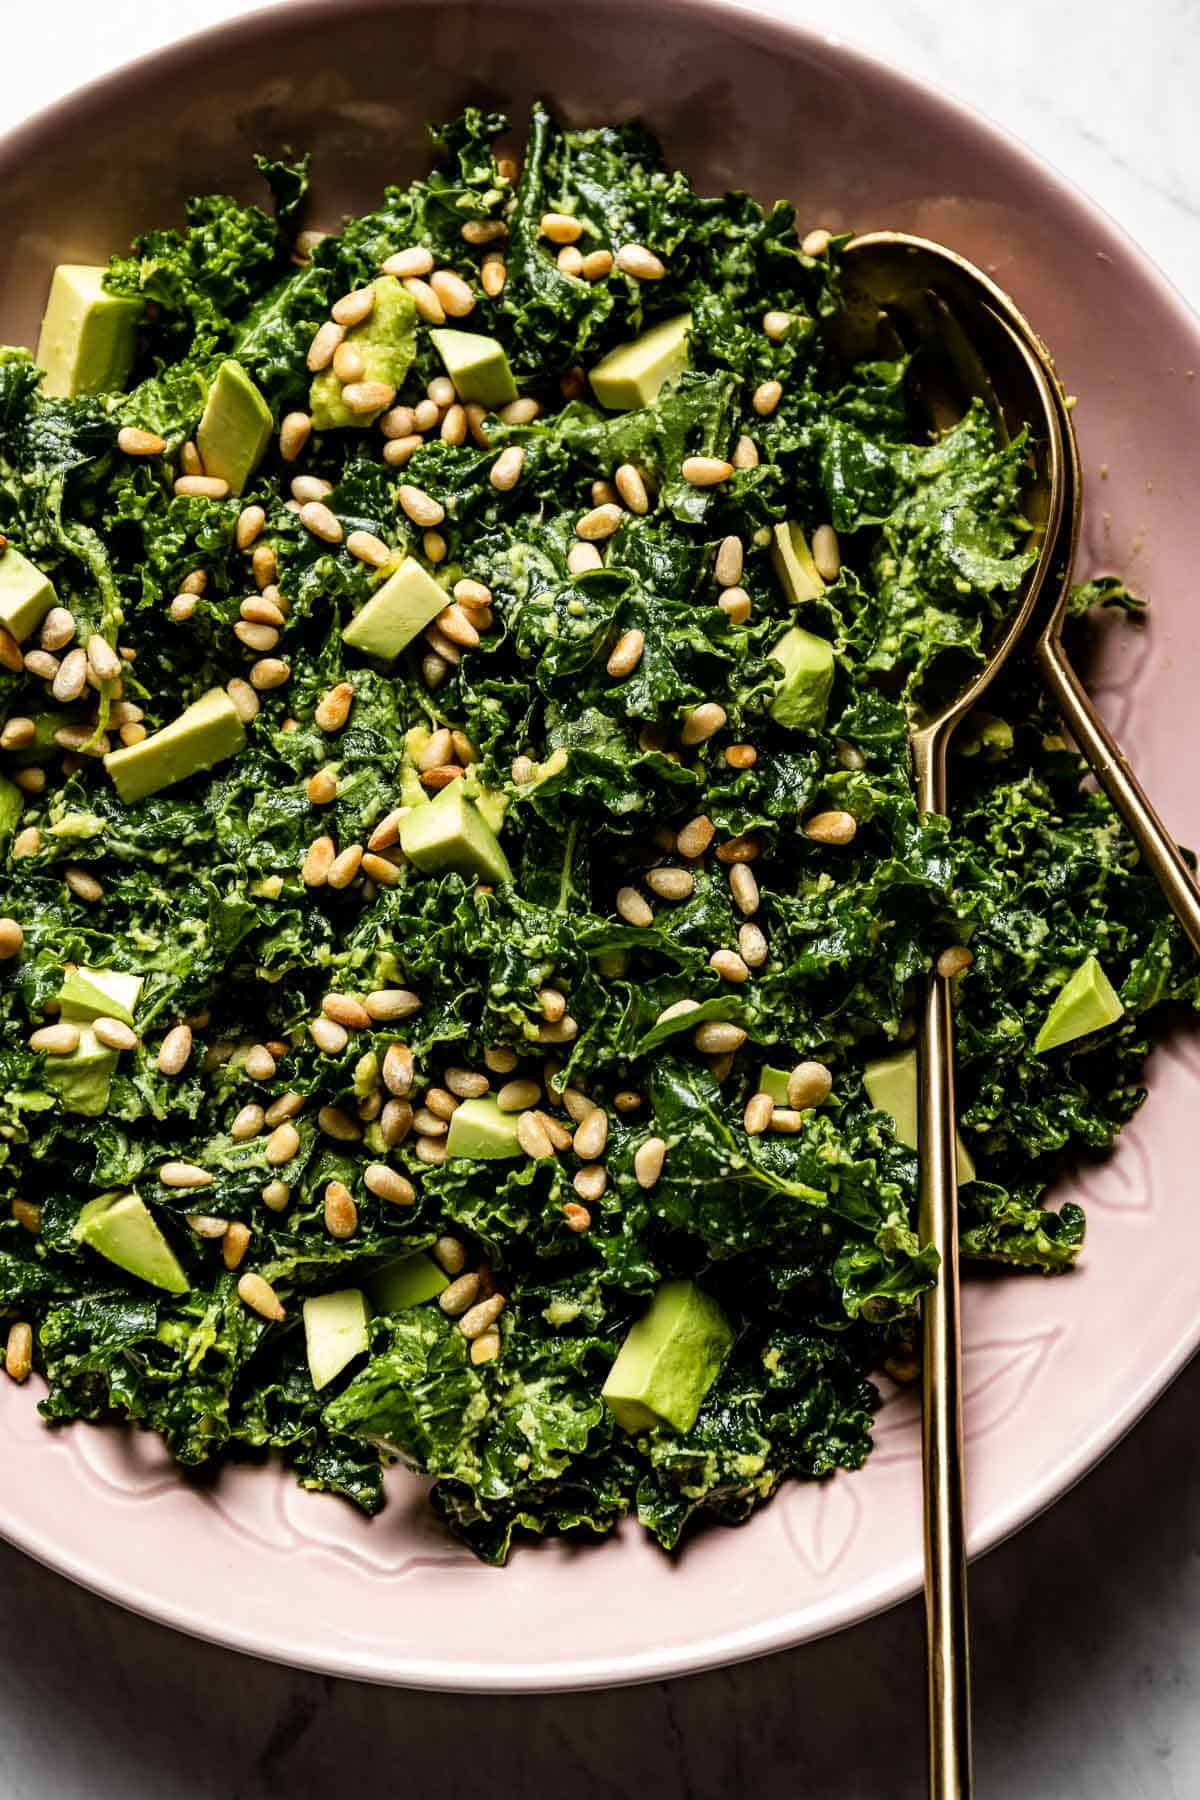 massaged kale salad with avocado in a bowl from the top view